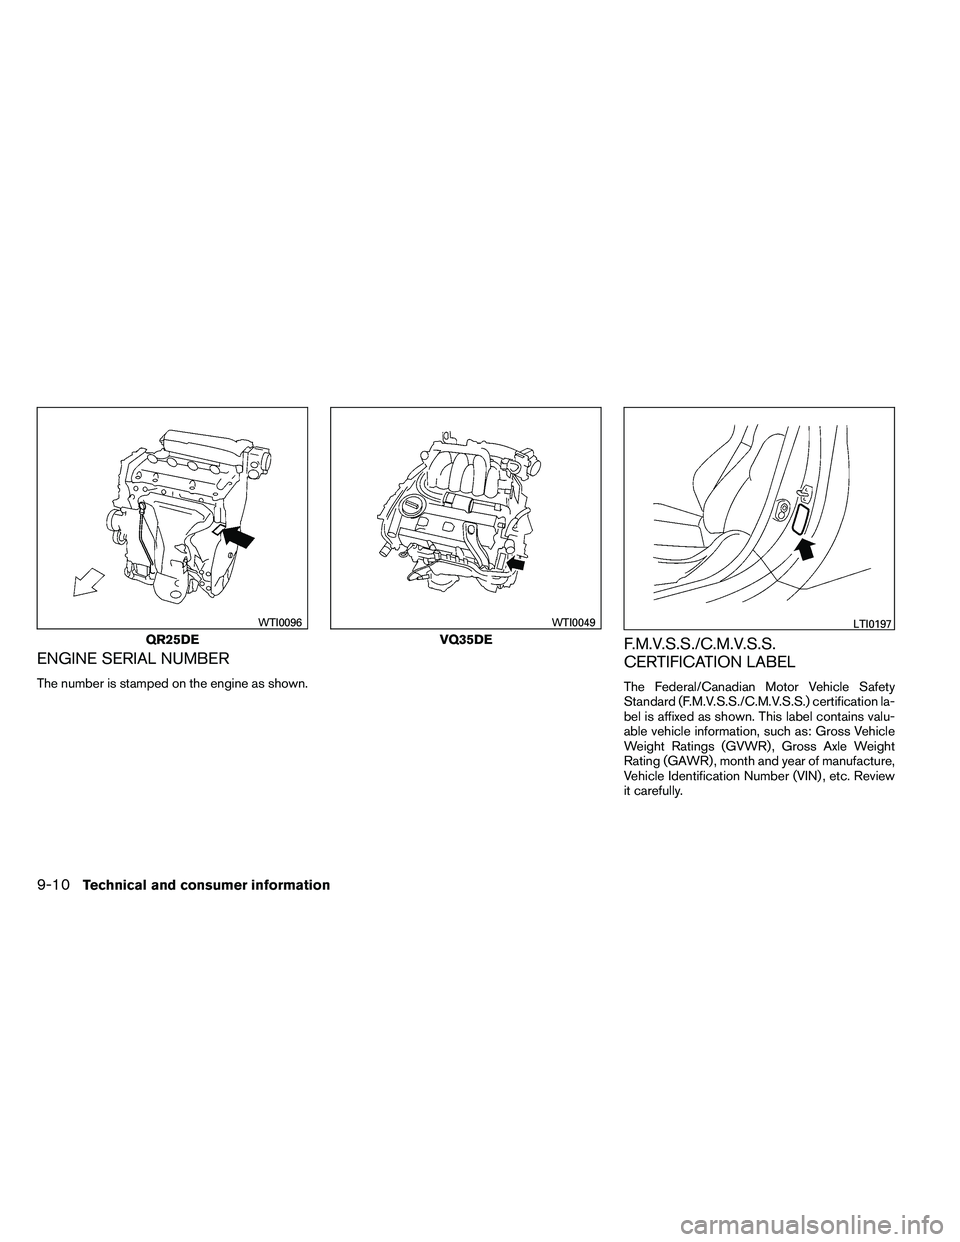 NISSAN ALTIMA 2012  Owners Manual ENGINE SERIAL NUMBER
The number is stamped on the engine as shown.
F.M.V.S.S./C.M.V.S.S.
CERTIFICATION LABEL
The Federal/Canadian Motor Vehicle Safety
Standard (F.M.V.S.S./C.M.V.S.S.) certification la